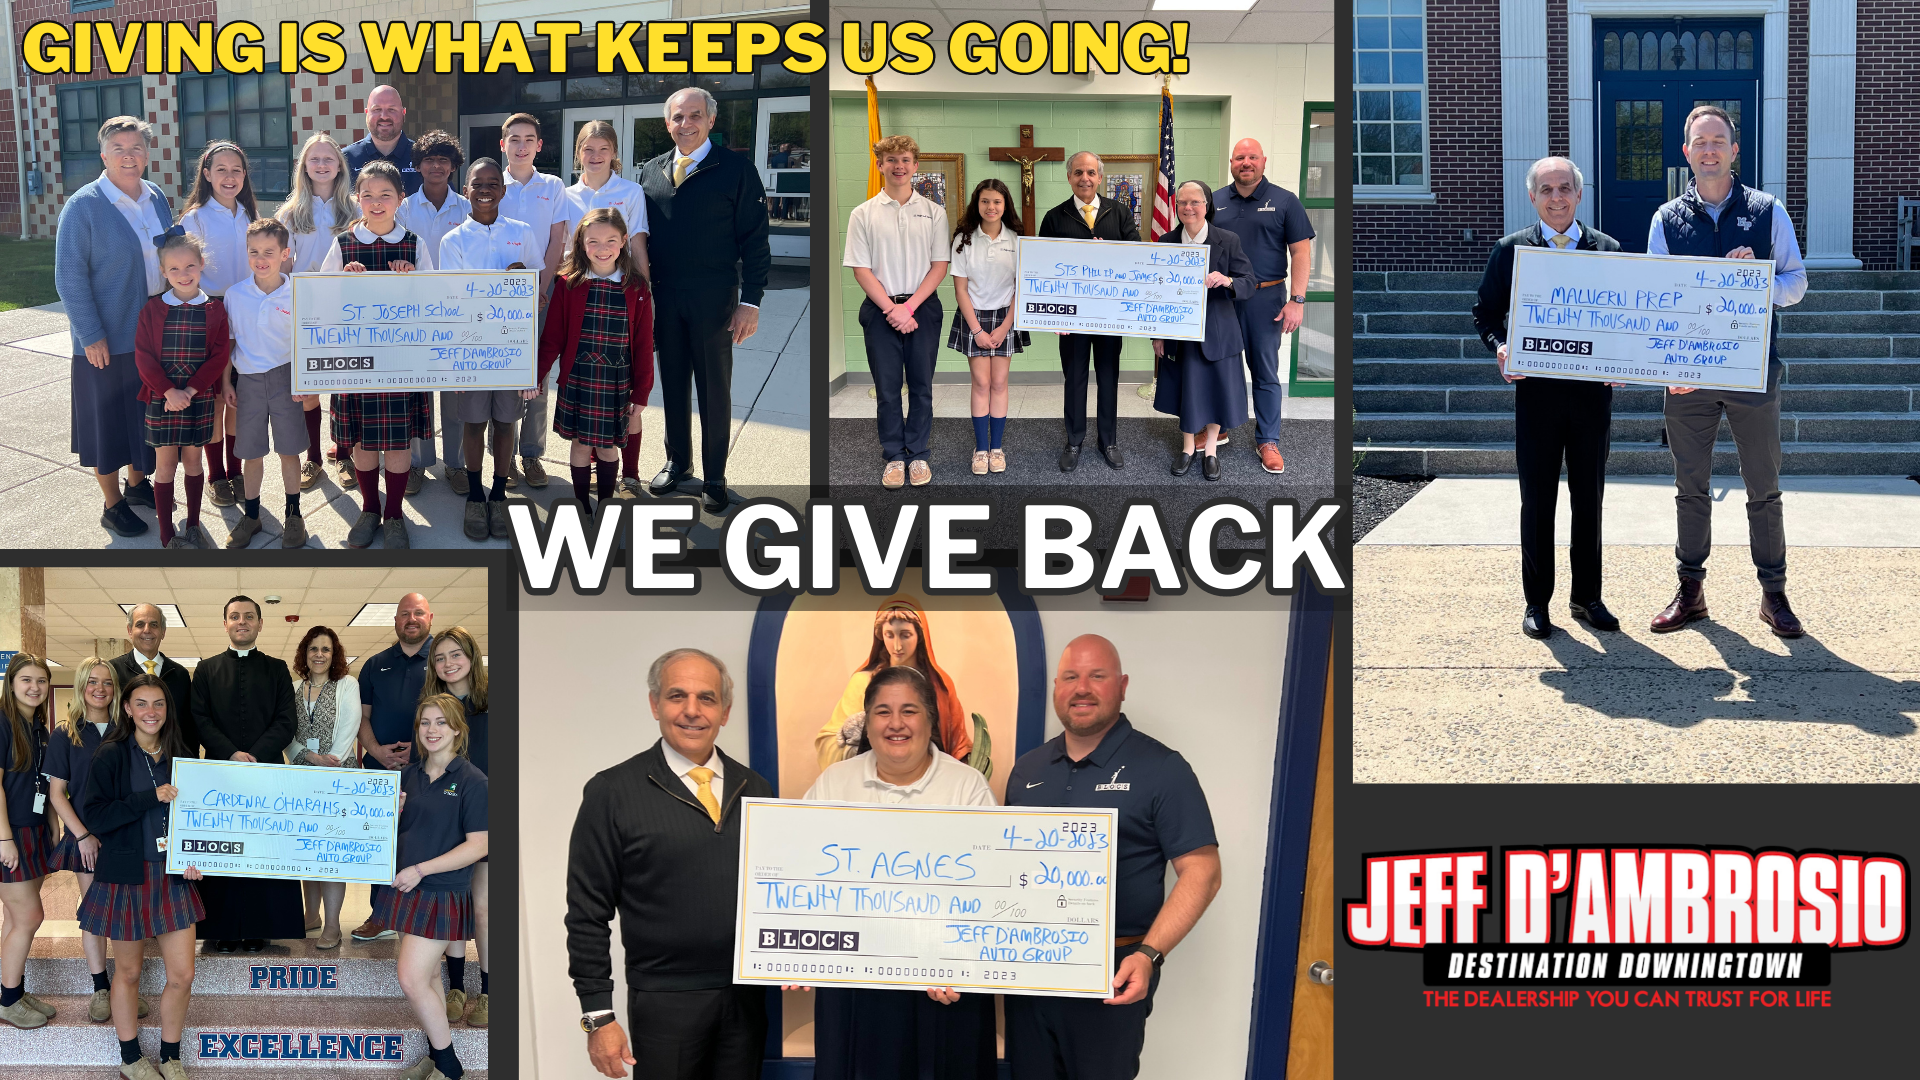 Jeff D'Ambrosio CDJR Gives Back to Our Community